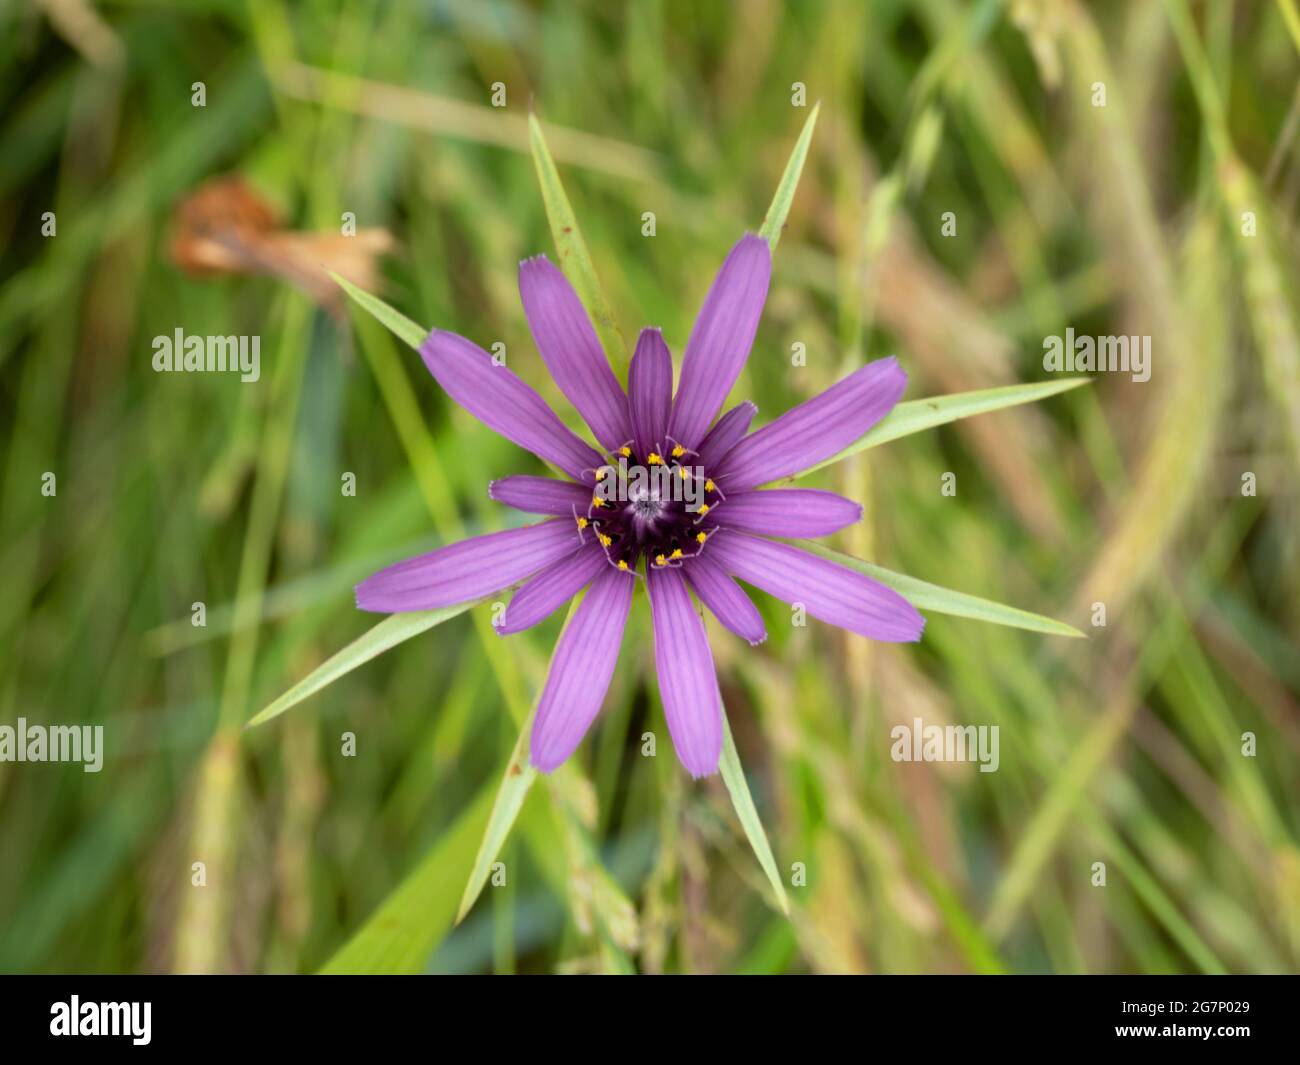 Tragopogon porrifolius known as purple or common salsify, oyster plant, vegetable oyster, Jerusalem star, Jack go to bed, goatsbeard or simply salsify Stock Photo